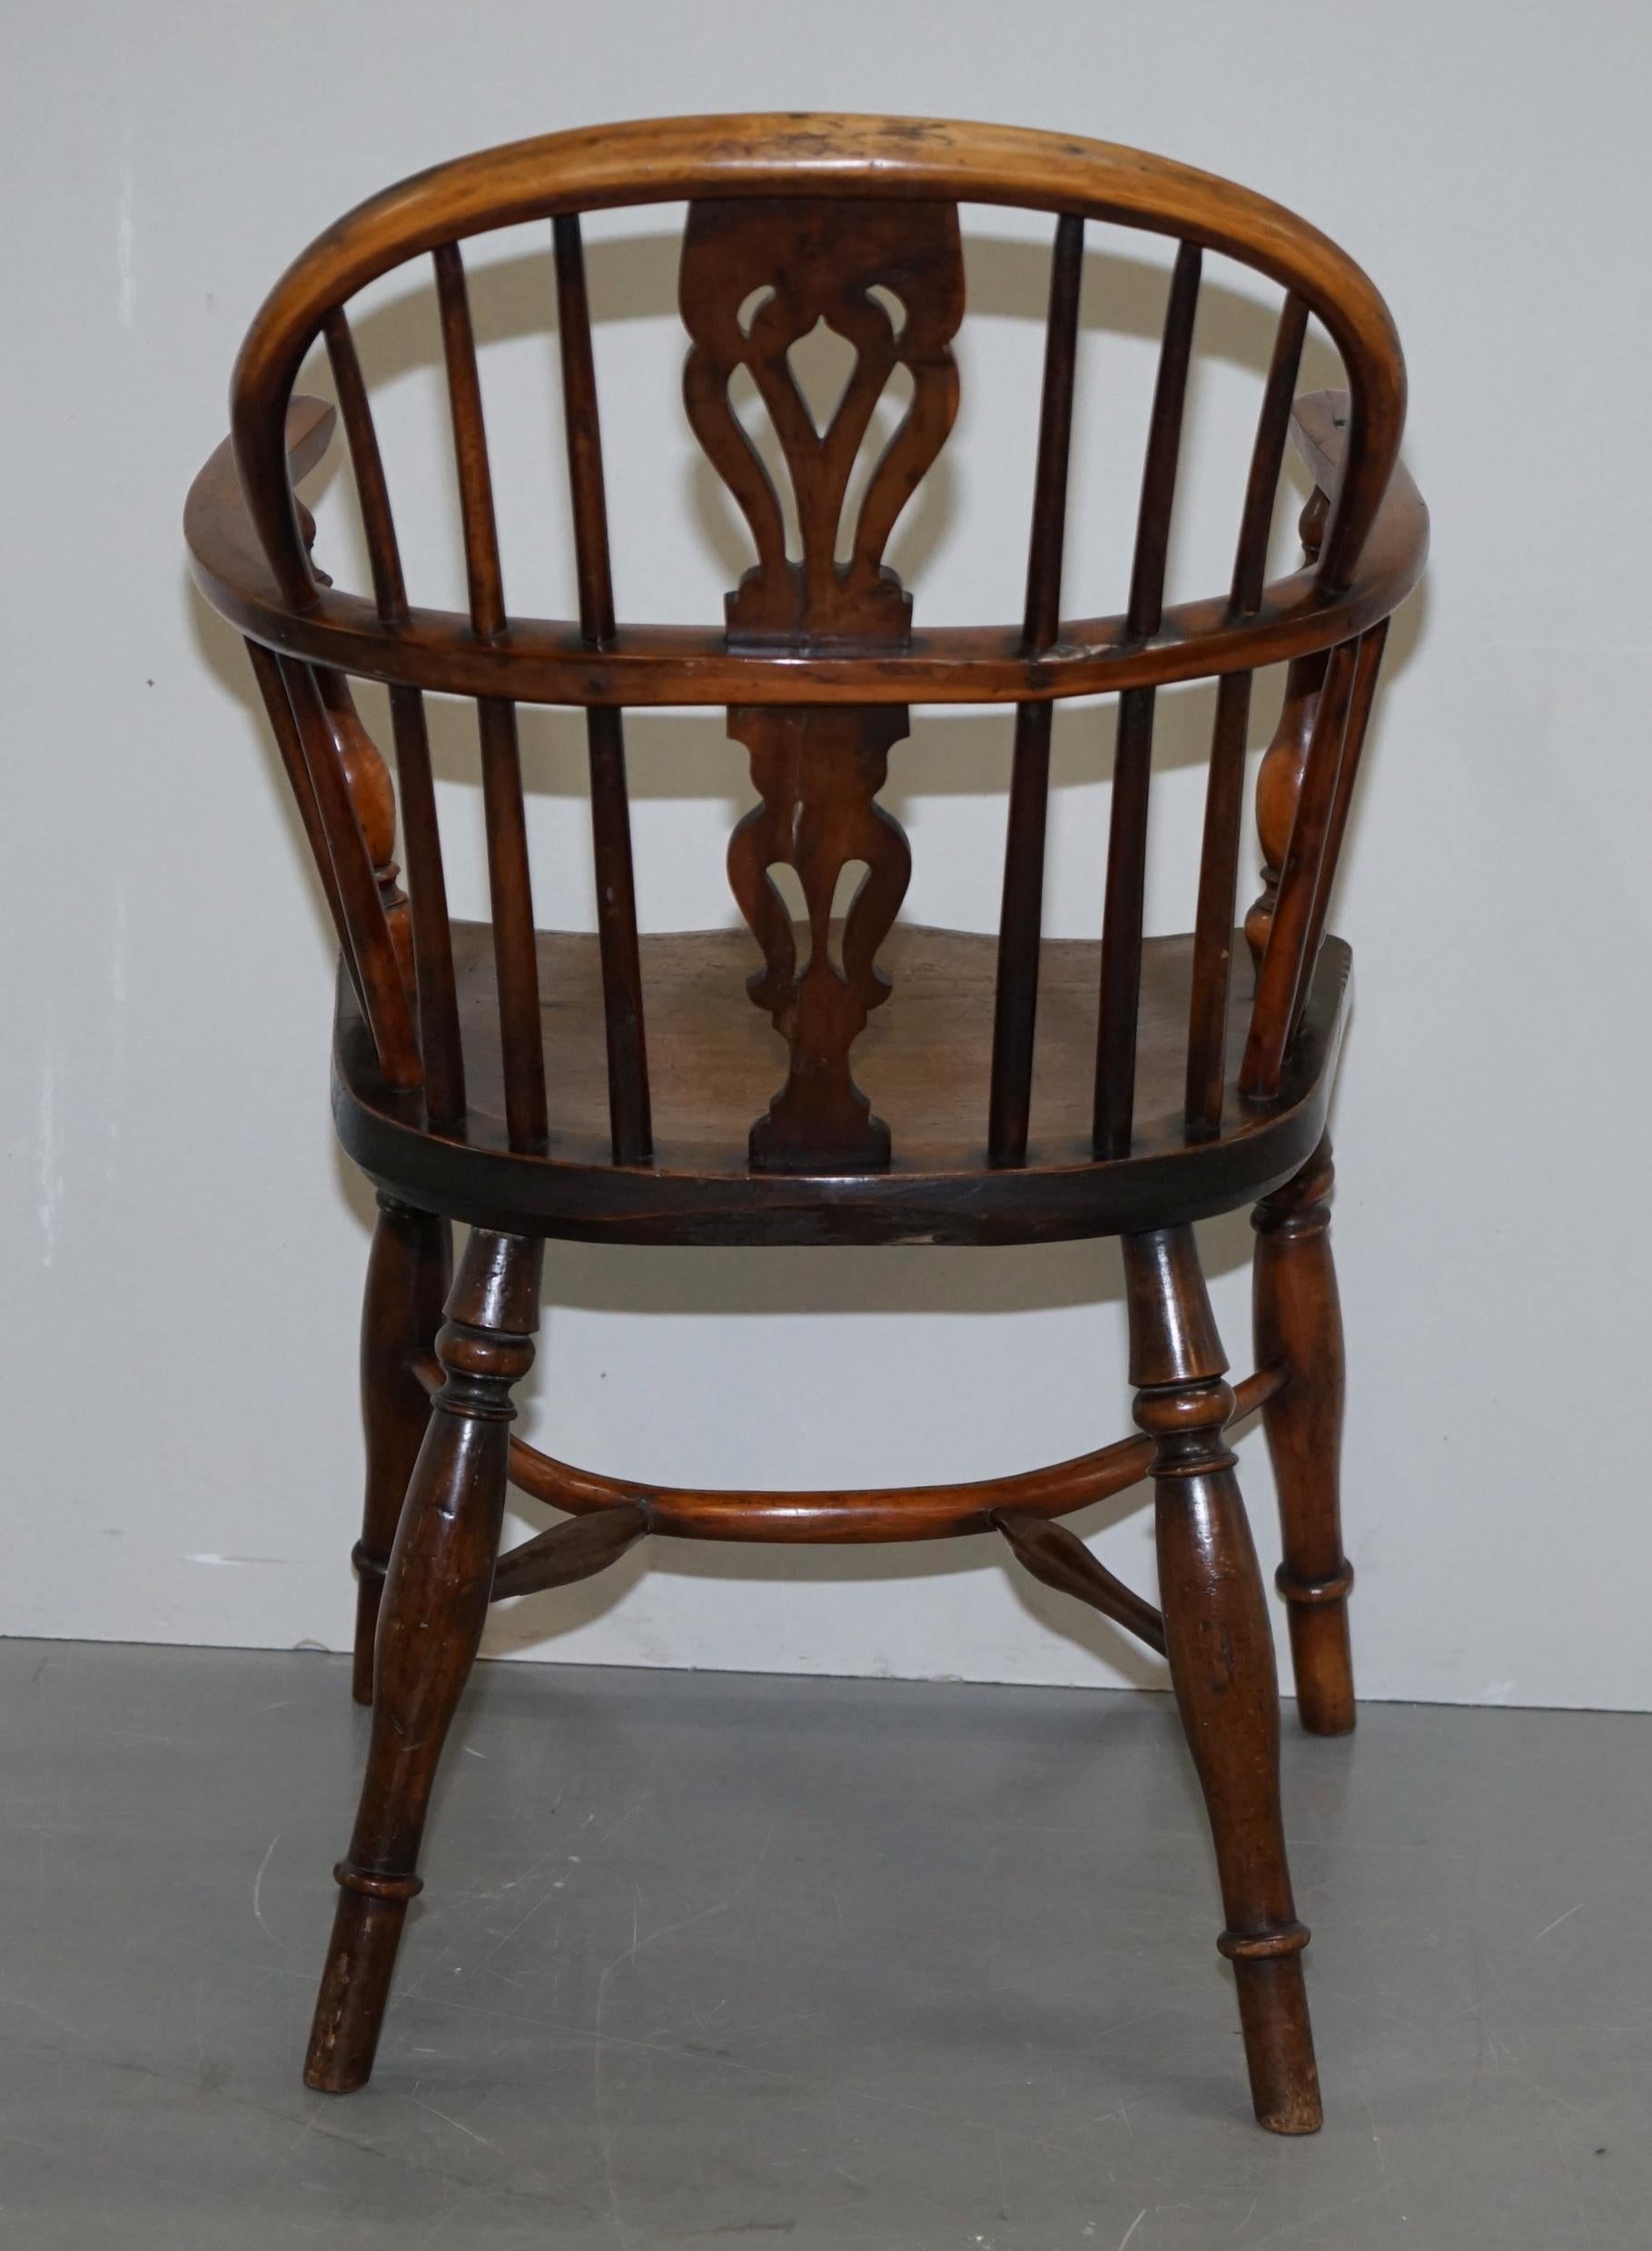 1 of 6 Burr Yew Wood Windsor Armchairs circa 1860 English Countryhouse Furniture For Sale 8